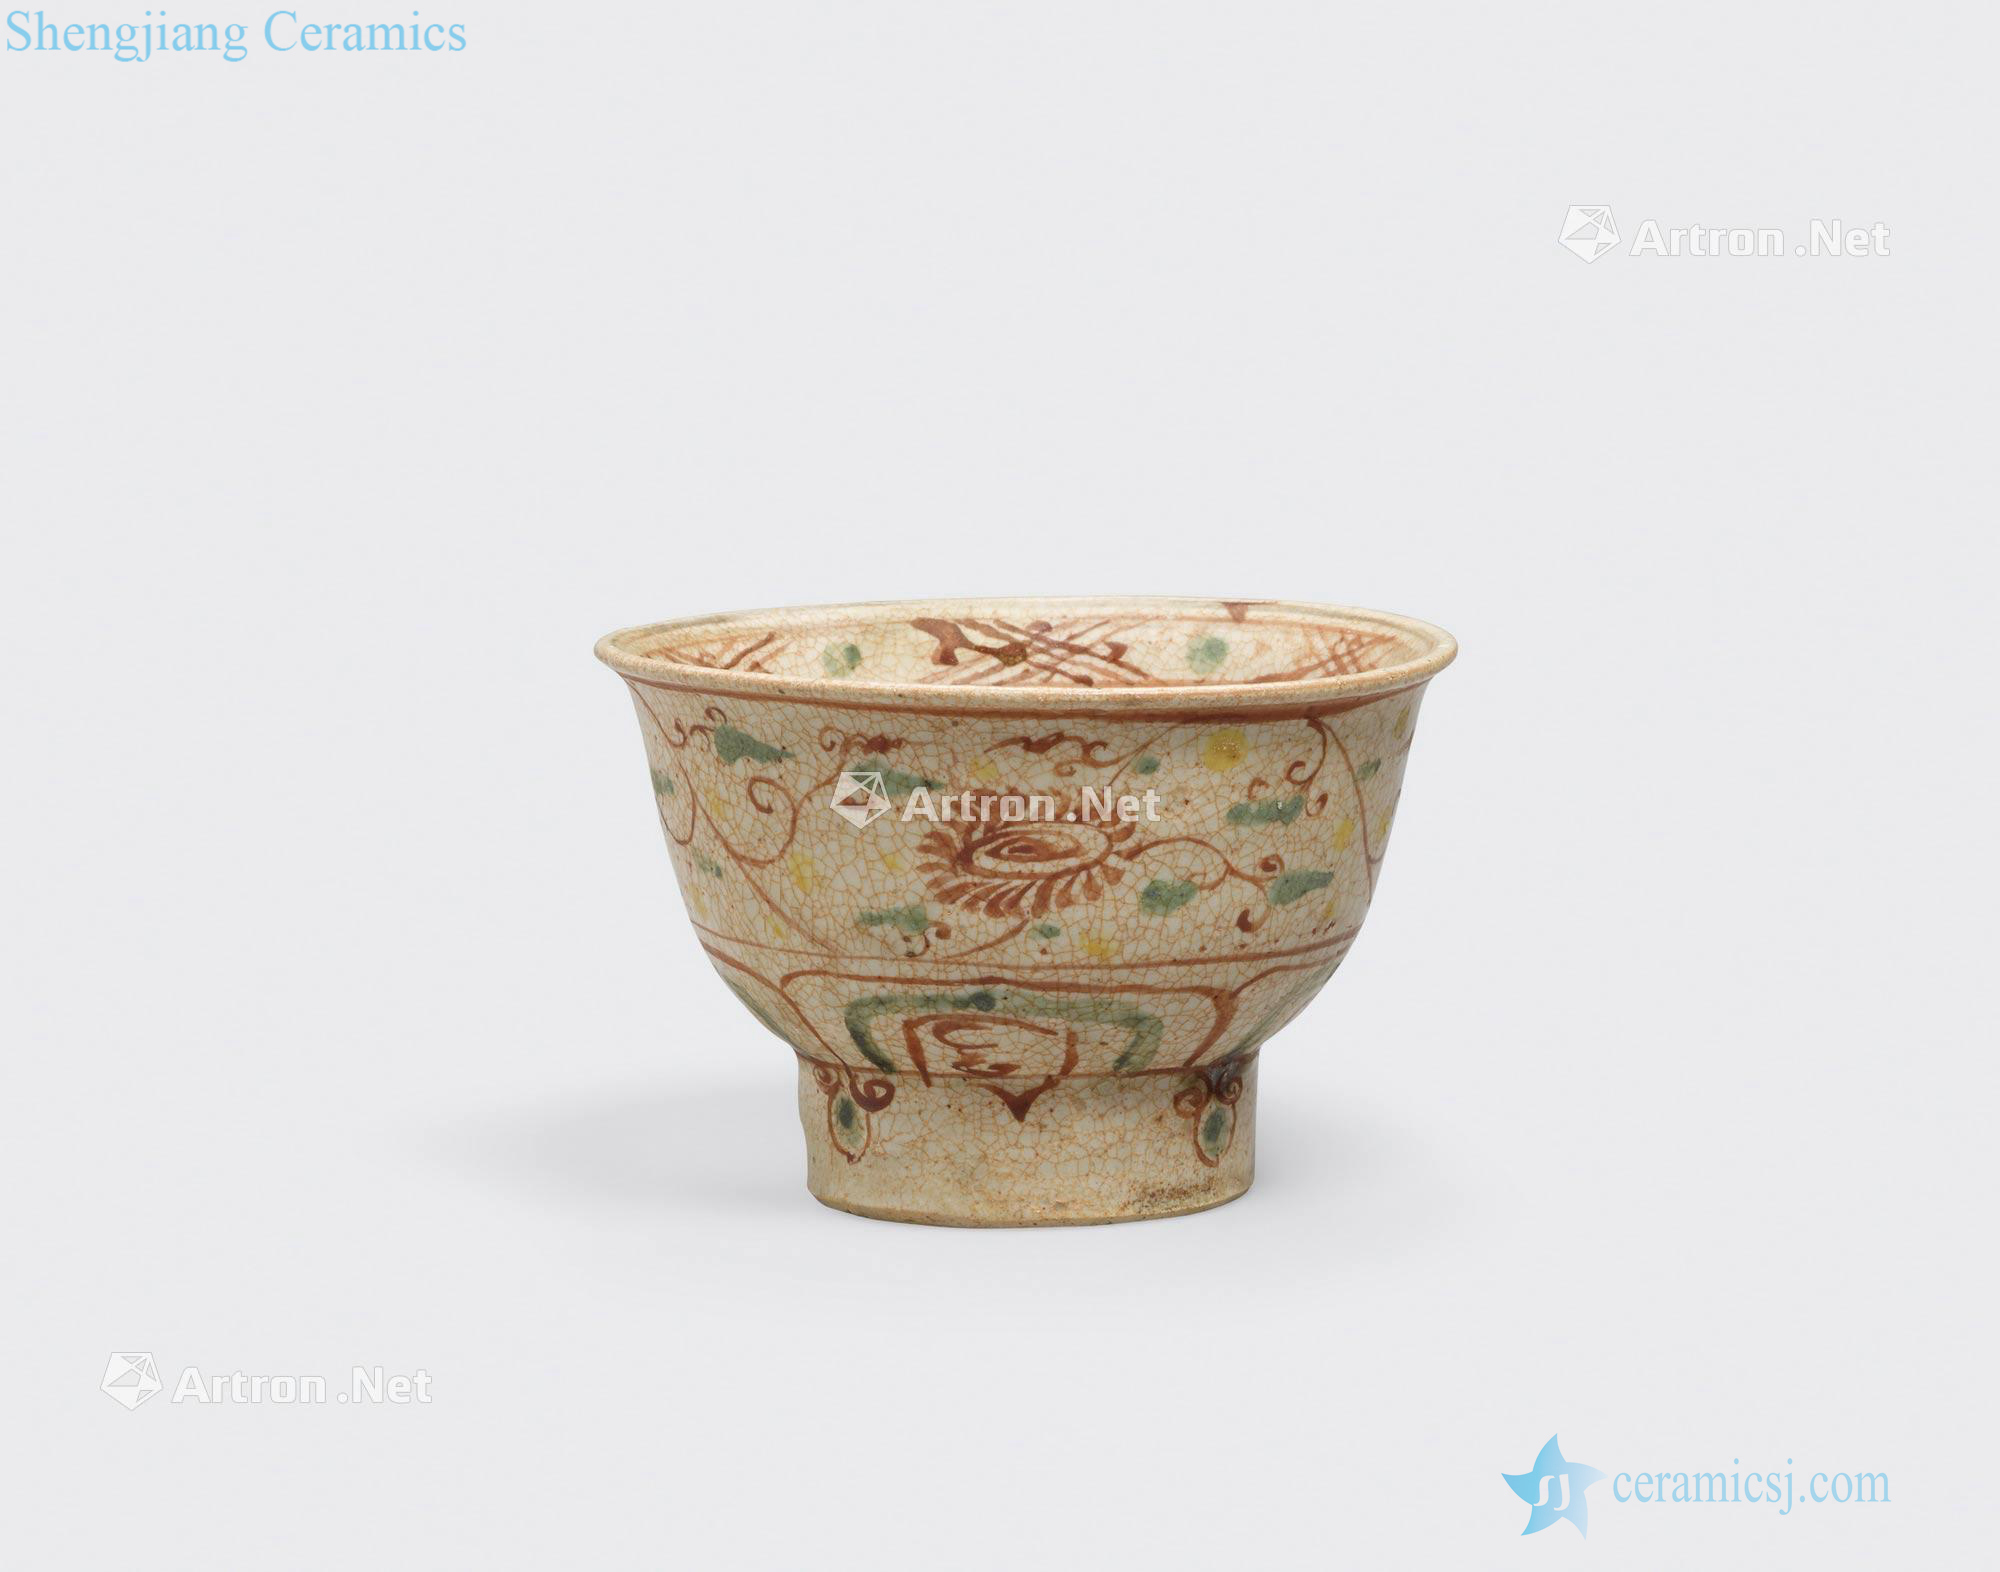 Le dynasty, 15 th/16 th century A TALL FOOTED BOWL WITH POLYCHROME ENAMEL DECORATION